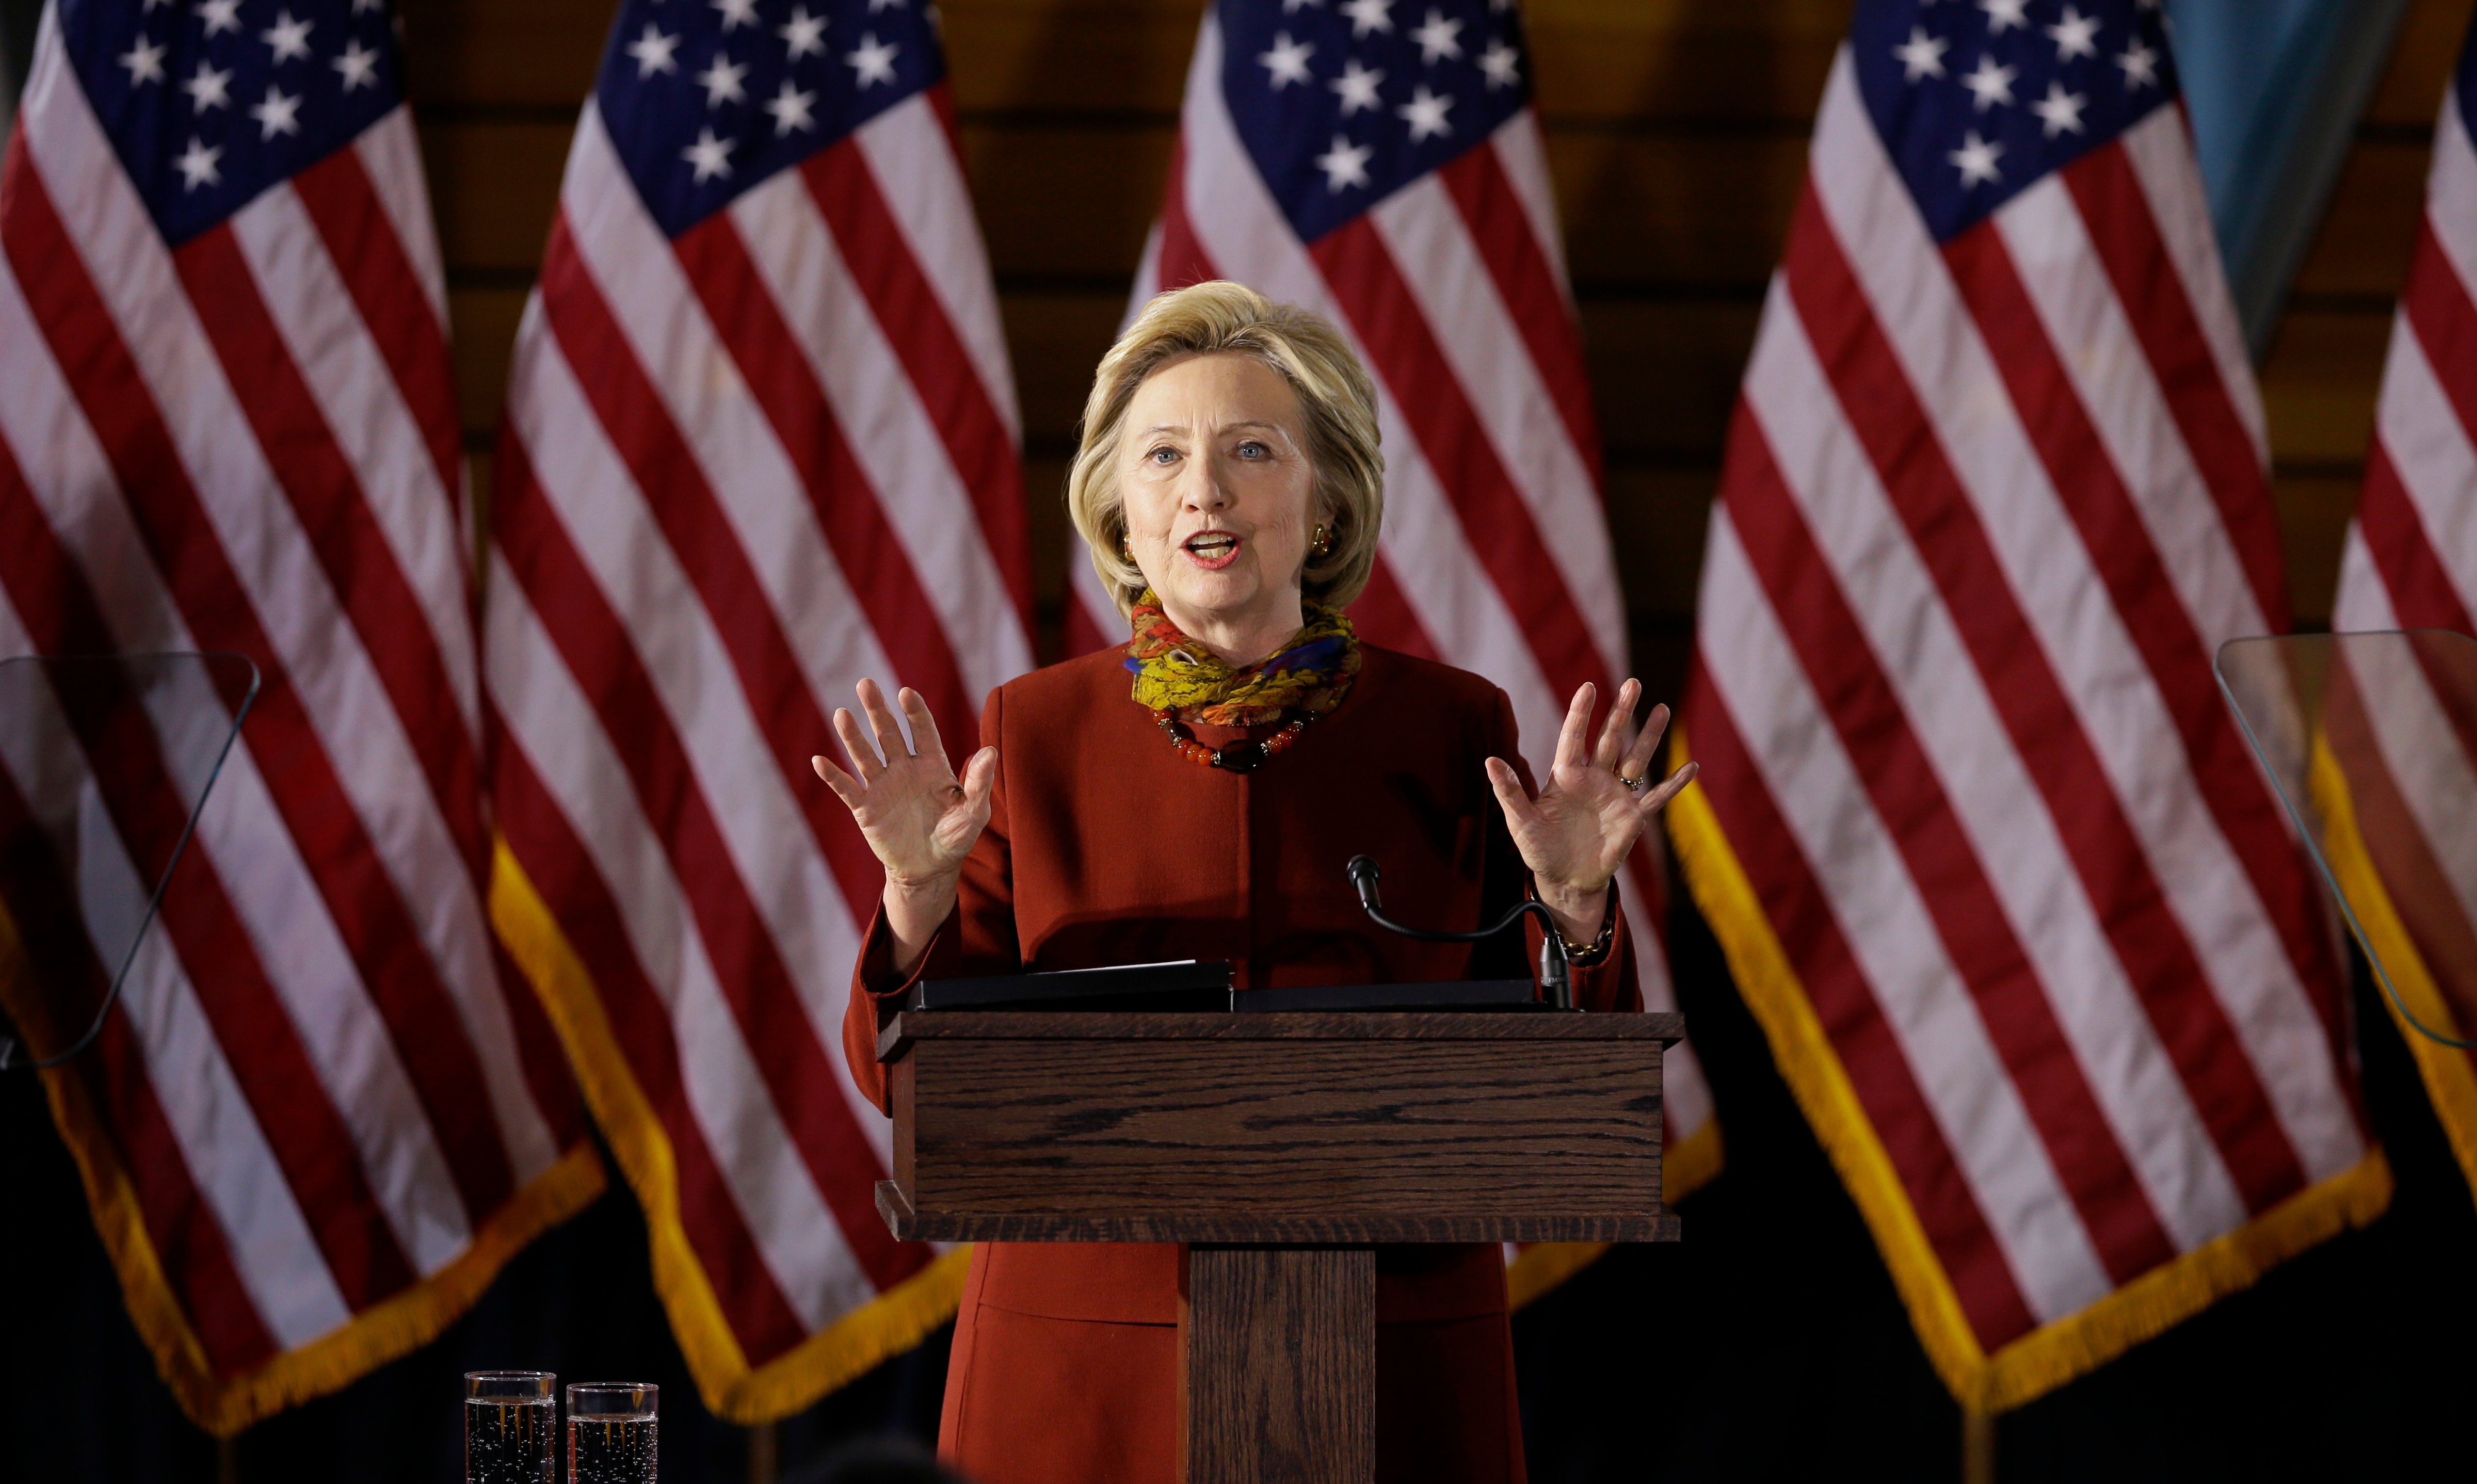 Hillary Clinton speaks about her counterterrorism strategy at the University of Minnesota in Minneapolis on Dec. 15, 2015. (Charlie Neibergall—AP)